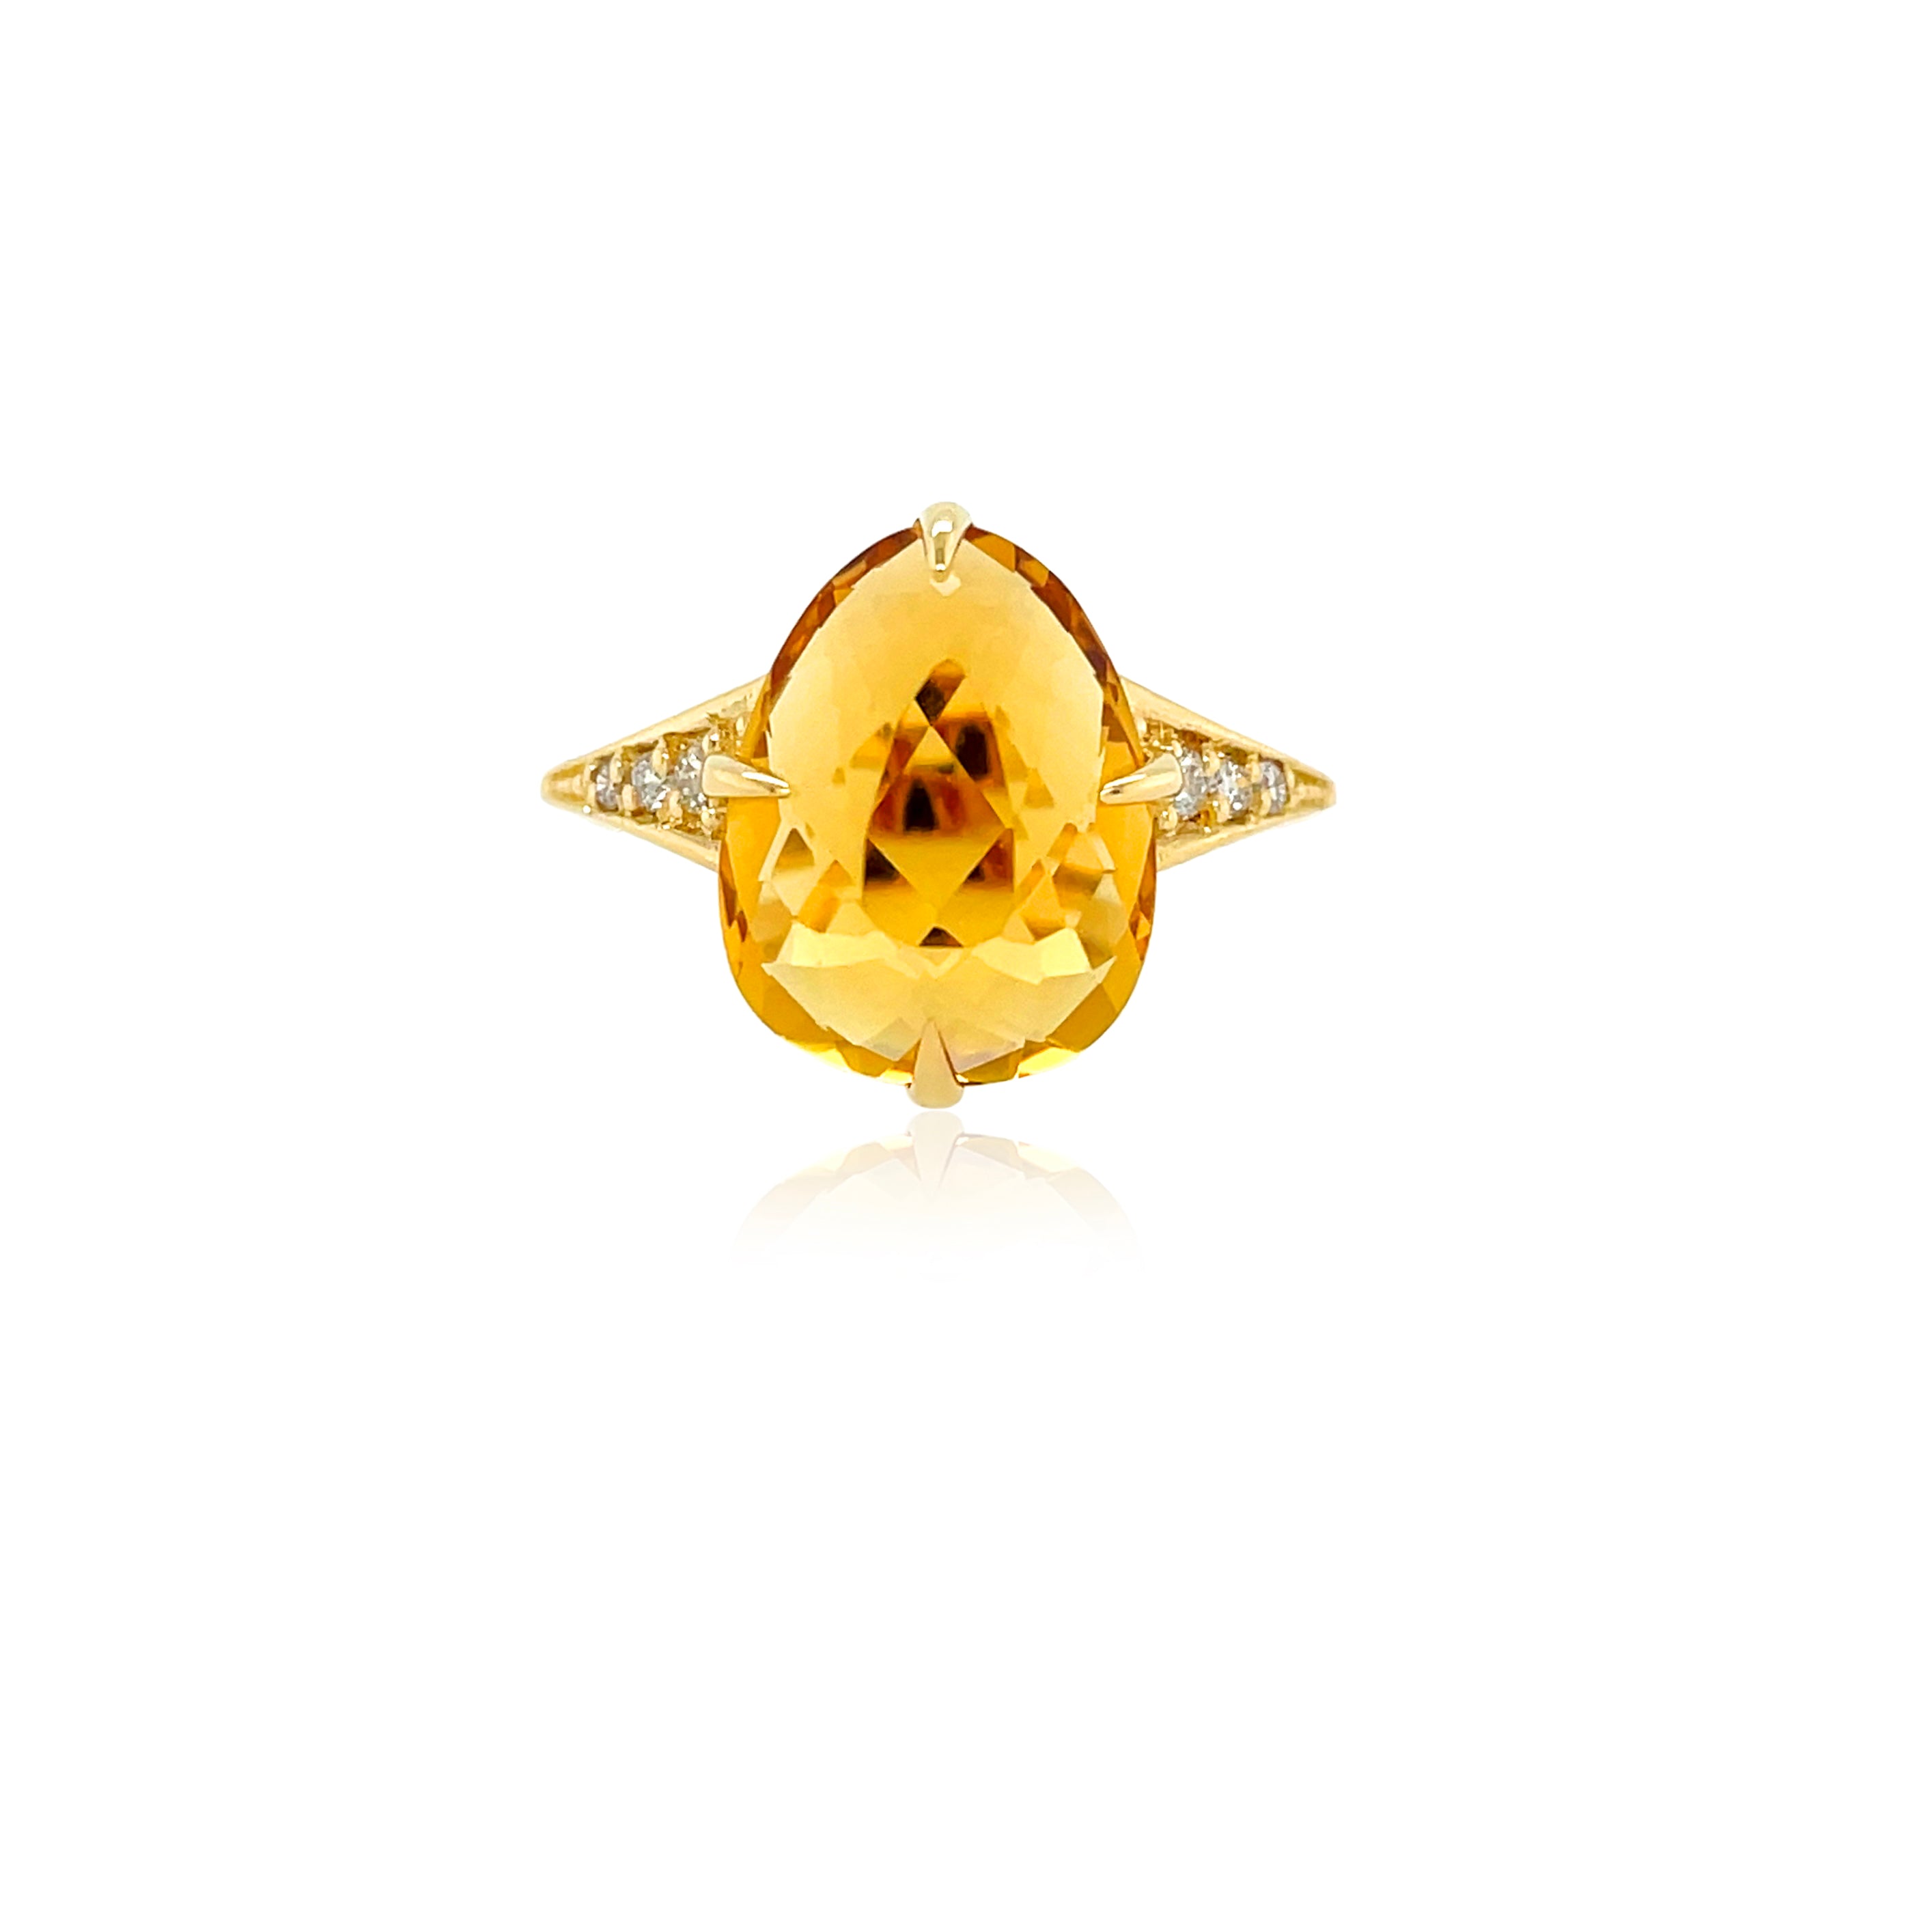 Experience Brazil with our vibrant Sugarloaf collection! A tear-shaped faceted citrine stone of 6.40 cts and 0.09 cts of petite round diamonds twinkle atop an 18 kt yellow gold setting. 15.00 mm.